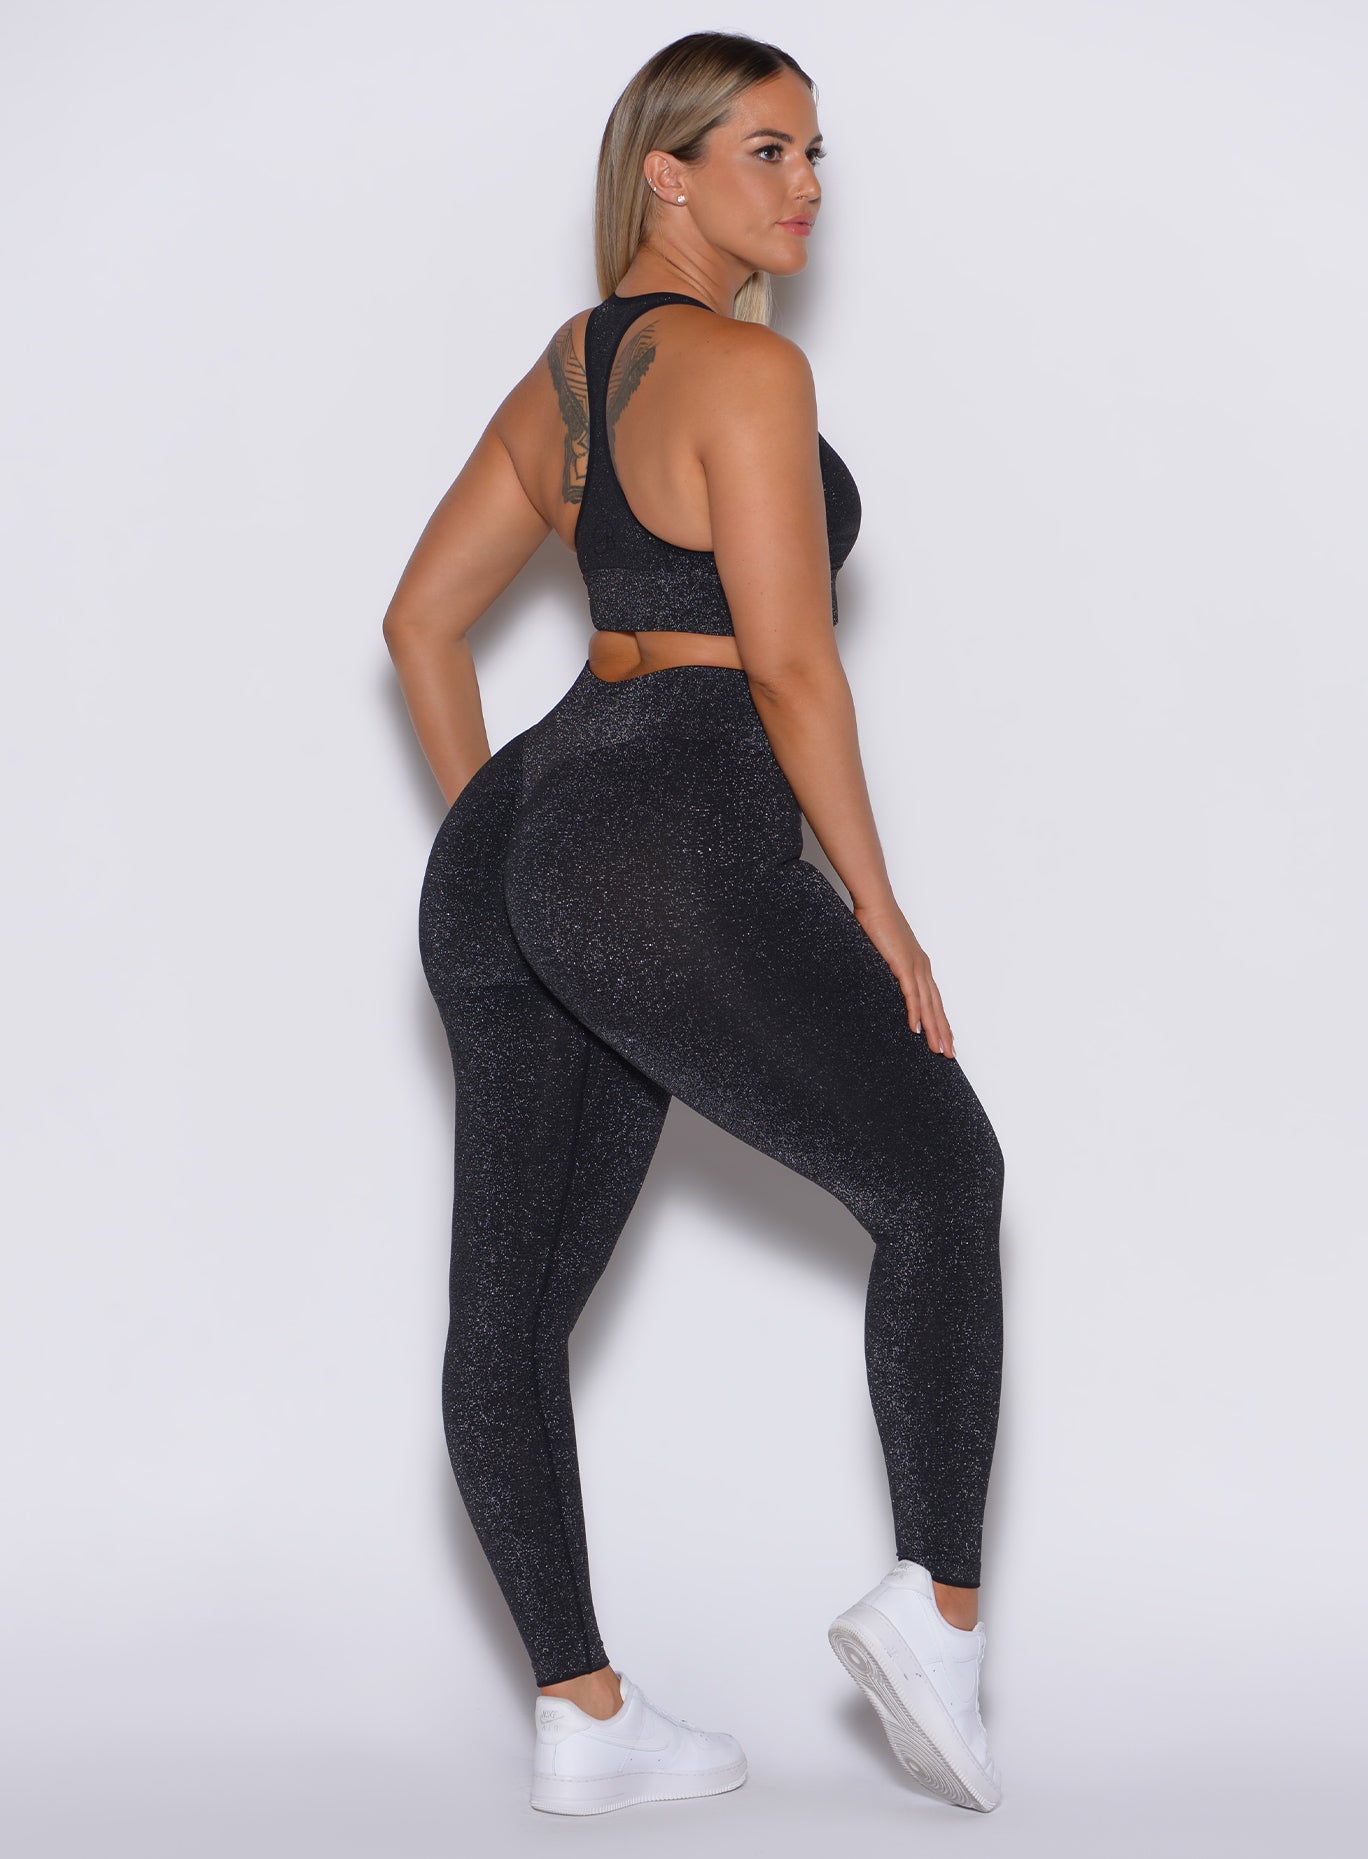 right side profile view of a model wearing our Shimmer Seamless Leggings in black sparkle color along with the matching bra